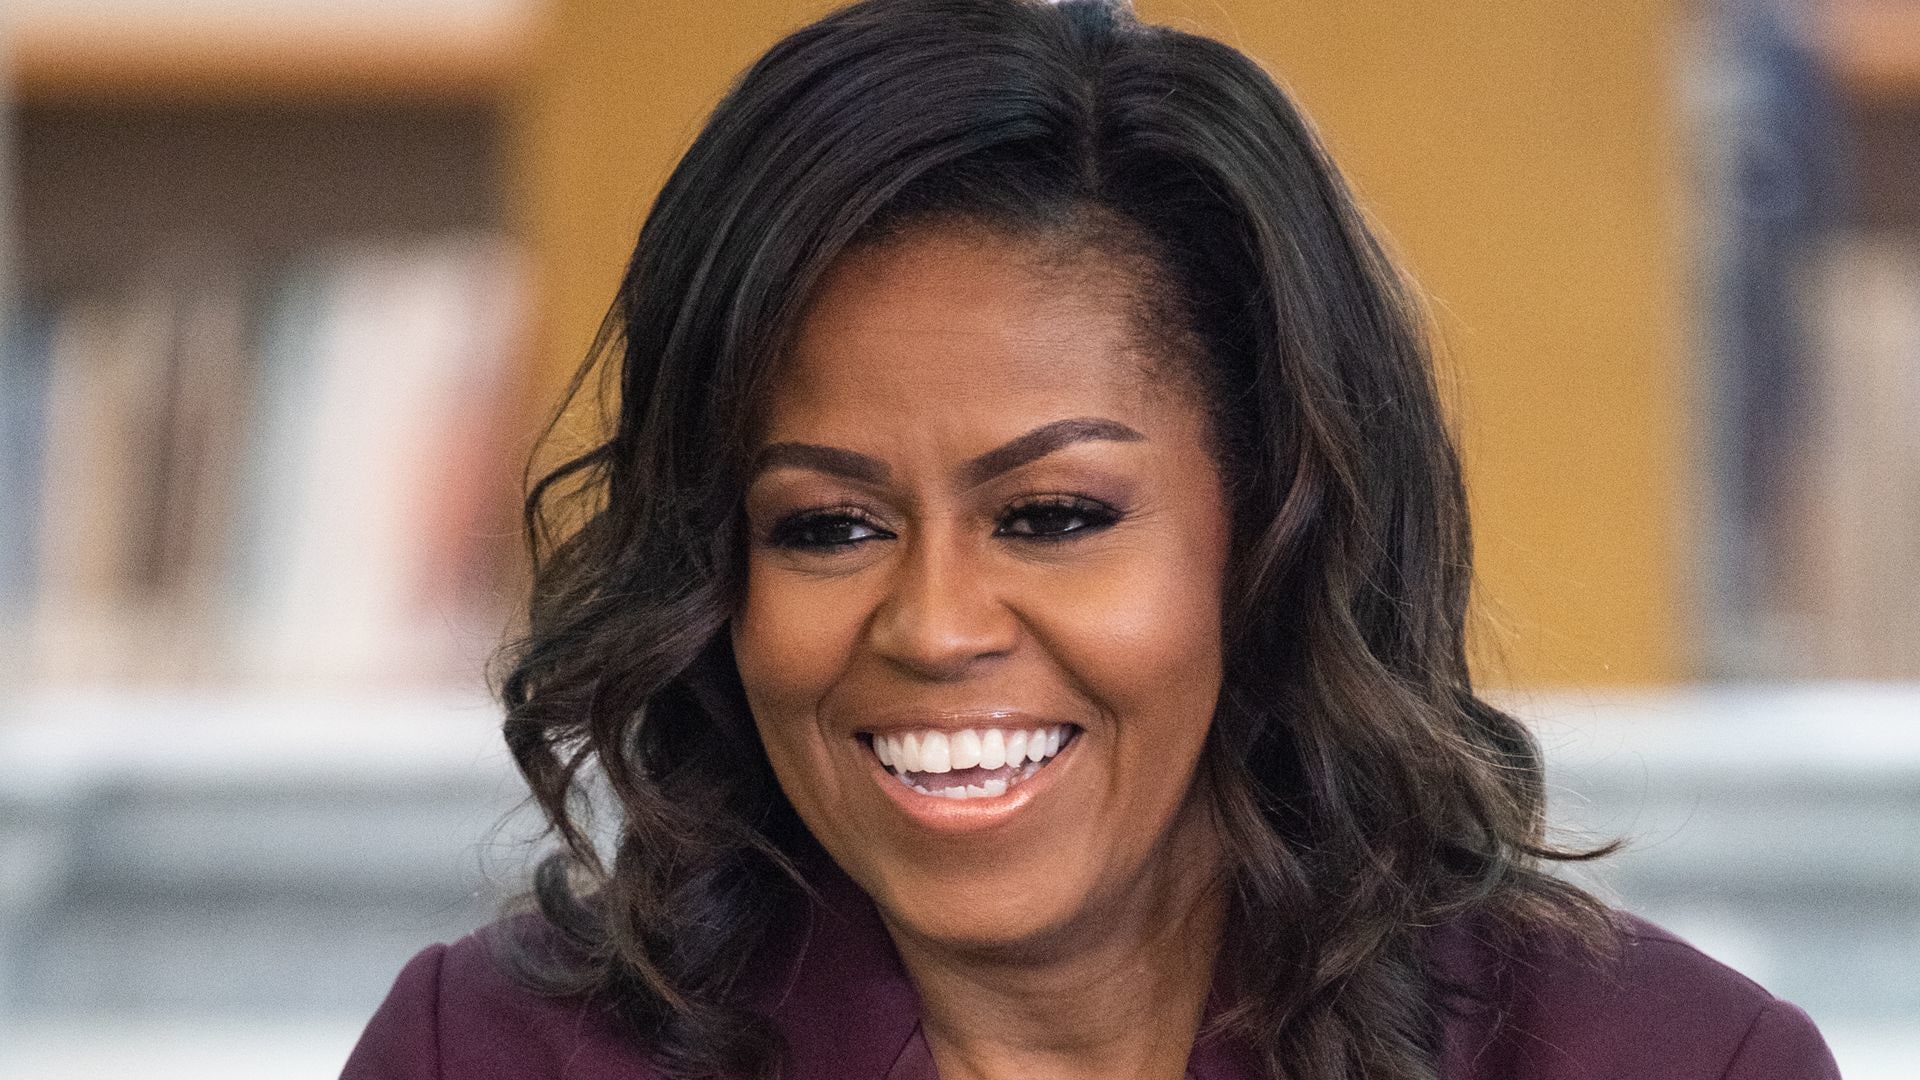 Michelle Obama in a maroon suit smiling with her hair in curls